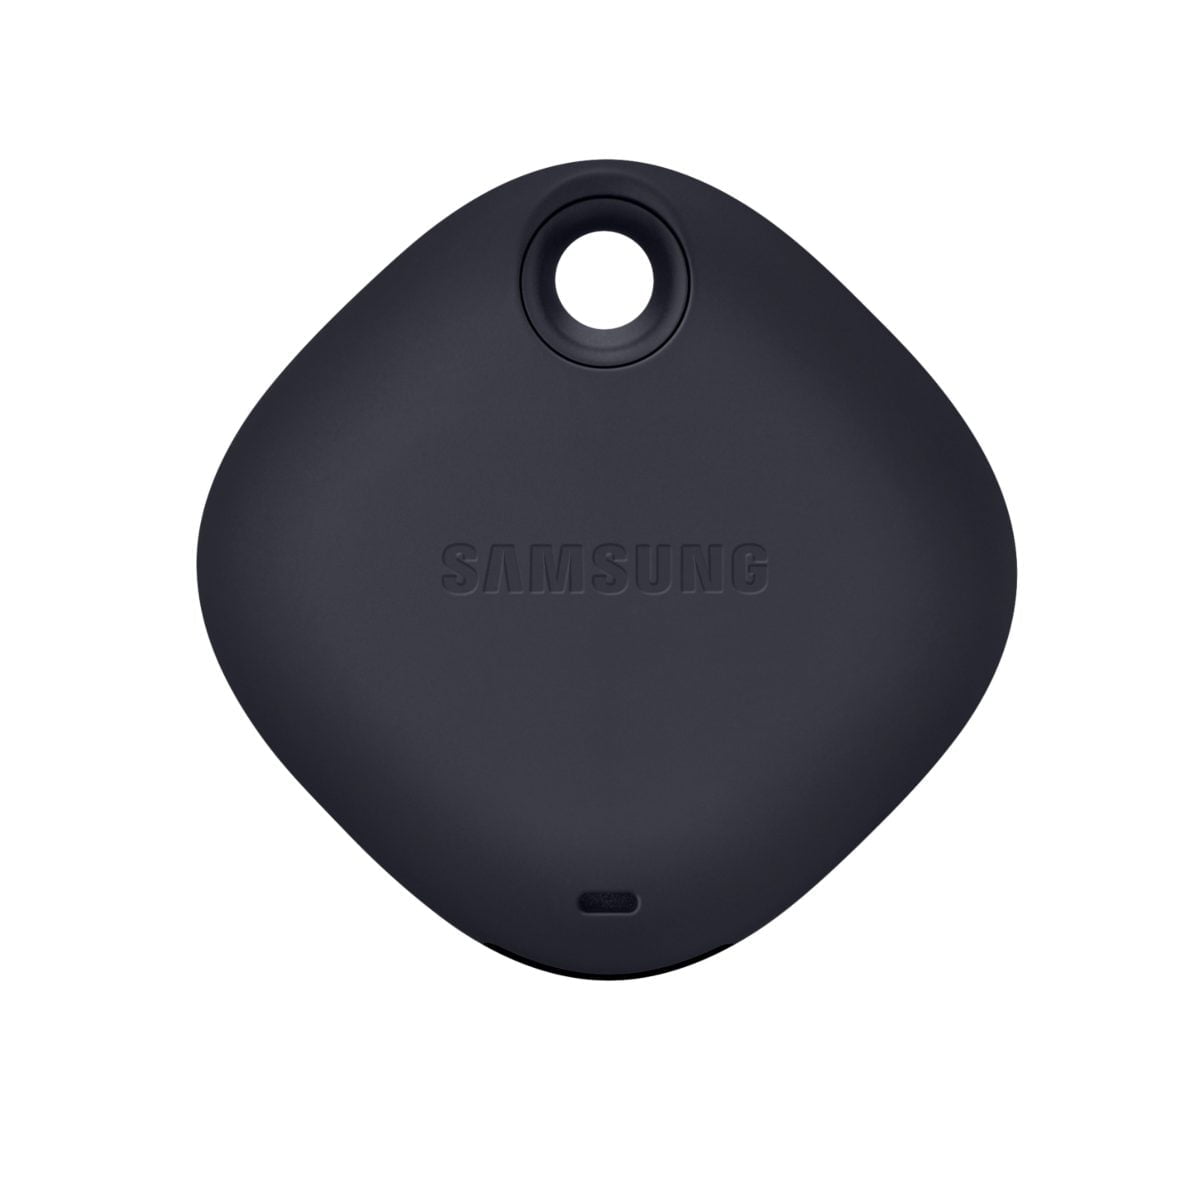 6449598Cv14D Scaled Samsung &Lt;H1&Gt;Samsung Galaxy Smarttag - Black&Lt;/H1&Gt; Https://Www.youtube.com/Watch?V=1Xolk17Znvk &Lt;Div Class=&Quot;Embedded-Component-Container Lv Product-Description&Quot;&Gt; &Lt;Div&Gt; &Lt;Div Id=&Quot;Shop-Product-Description-15265389&Quot; Class=&Quot;_None&Quot; Data-Version=&Quot;1.3.44&Quot;&Gt; &Lt;Div Class=&Quot;Shop-Product-Description&Quot;&Gt;&Lt;Section Class=&Quot;Align-Heading-Left&Quot; Data-Reactroot=&Quot;&Quot;&Gt; &Lt;Div Class=&Quot;Long-Description-Container Body-Copy &Quot;&Gt; &Lt;Div Class=&Quot;Html-Fragment&Quot;&Gt;Galaxy Smarttag Makes Your On-The-Go Life More Worry-Free Than Ever. Keep Track Of Something Precious While It'S On The Move, Or Find Your Car Keys That Fell Behind The Couch&Lt;/Div&Gt; &Lt;/Div&Gt; &Lt;/Section&Gt;&Lt;/Div&Gt; &Lt;/Div&Gt; &Lt;/Div&Gt; &Lt;/Div&Gt; &Lt;Div Class=&Quot;Embedded-Component-Container Lv Product-Features&Quot;&Gt;&Lt;/Div&Gt; Smart Tag Samsung Galaxy Smarttag - Black